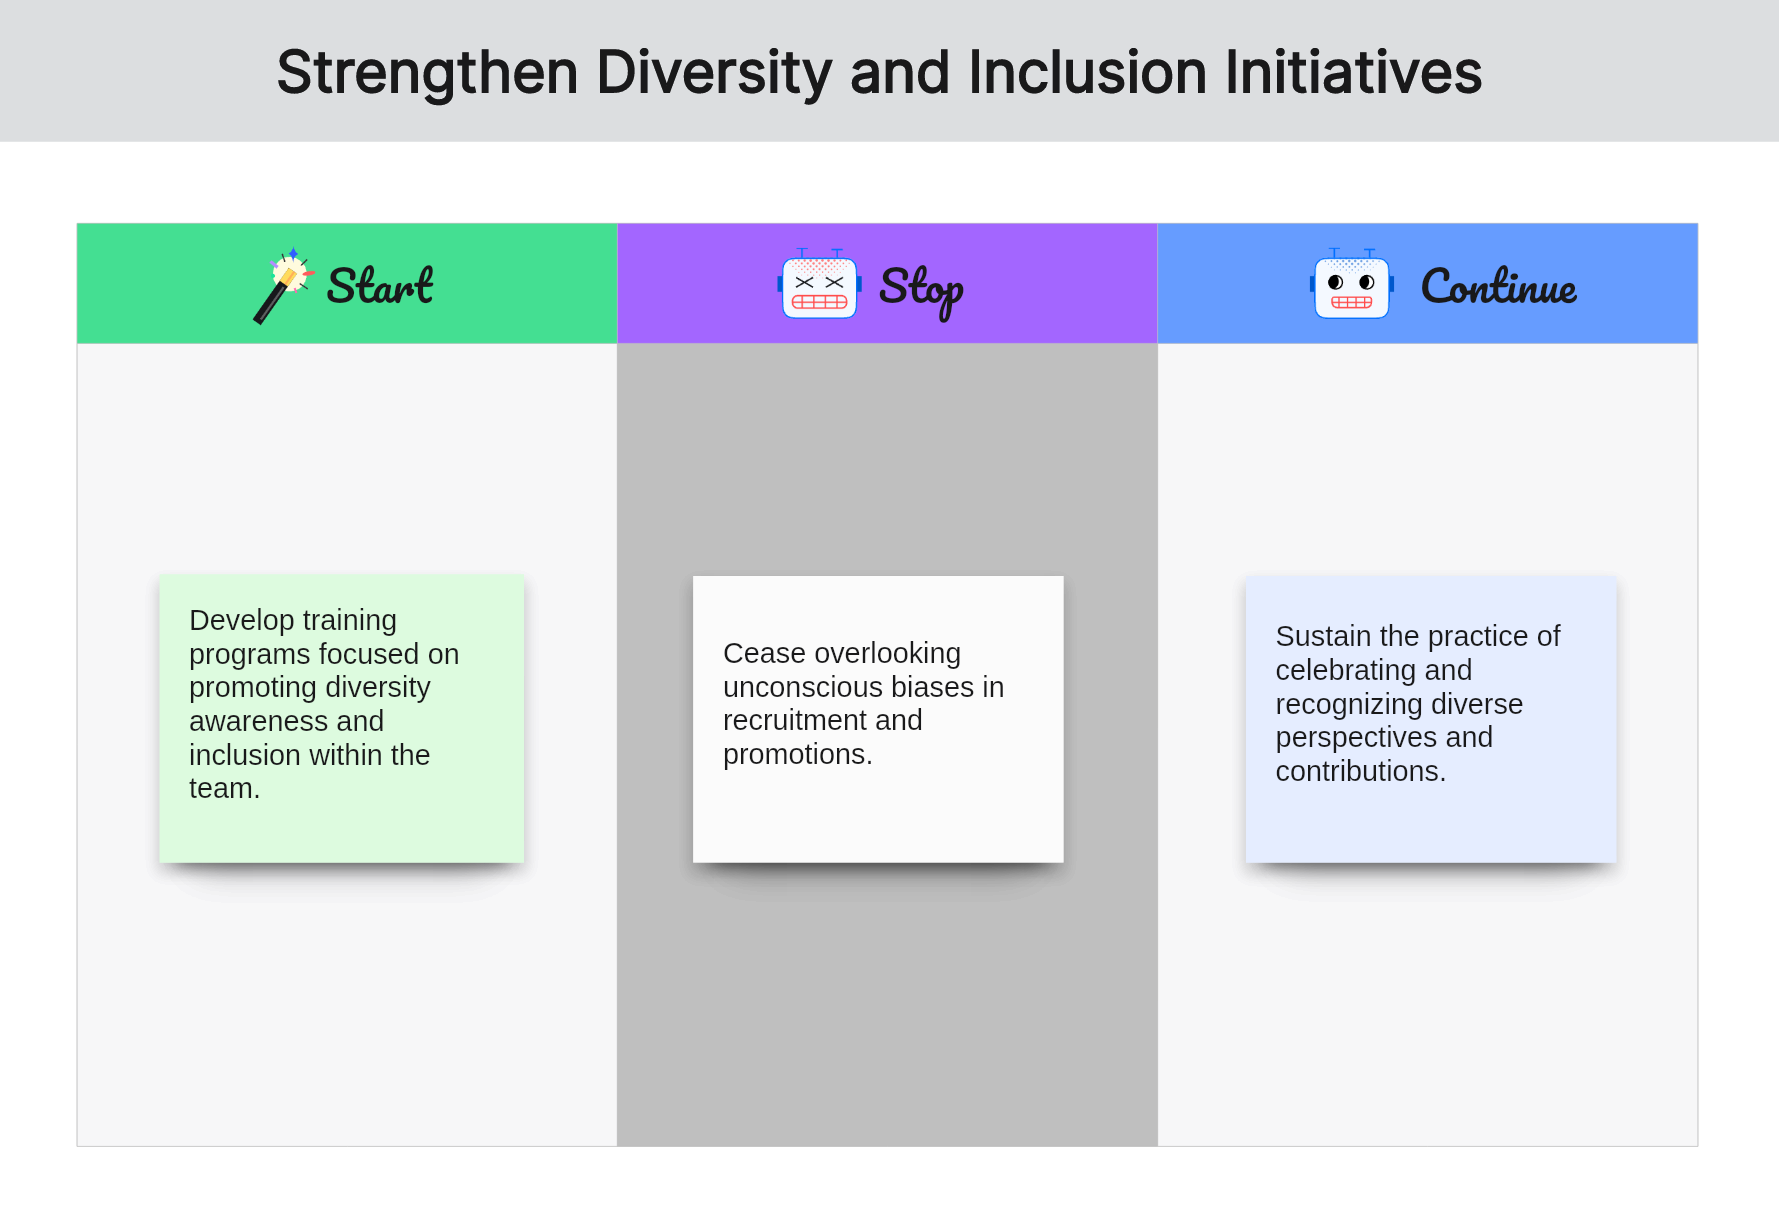 start-stop-continue-examples-for-teams-strengthen-diversity-and-inclusion-initiatives